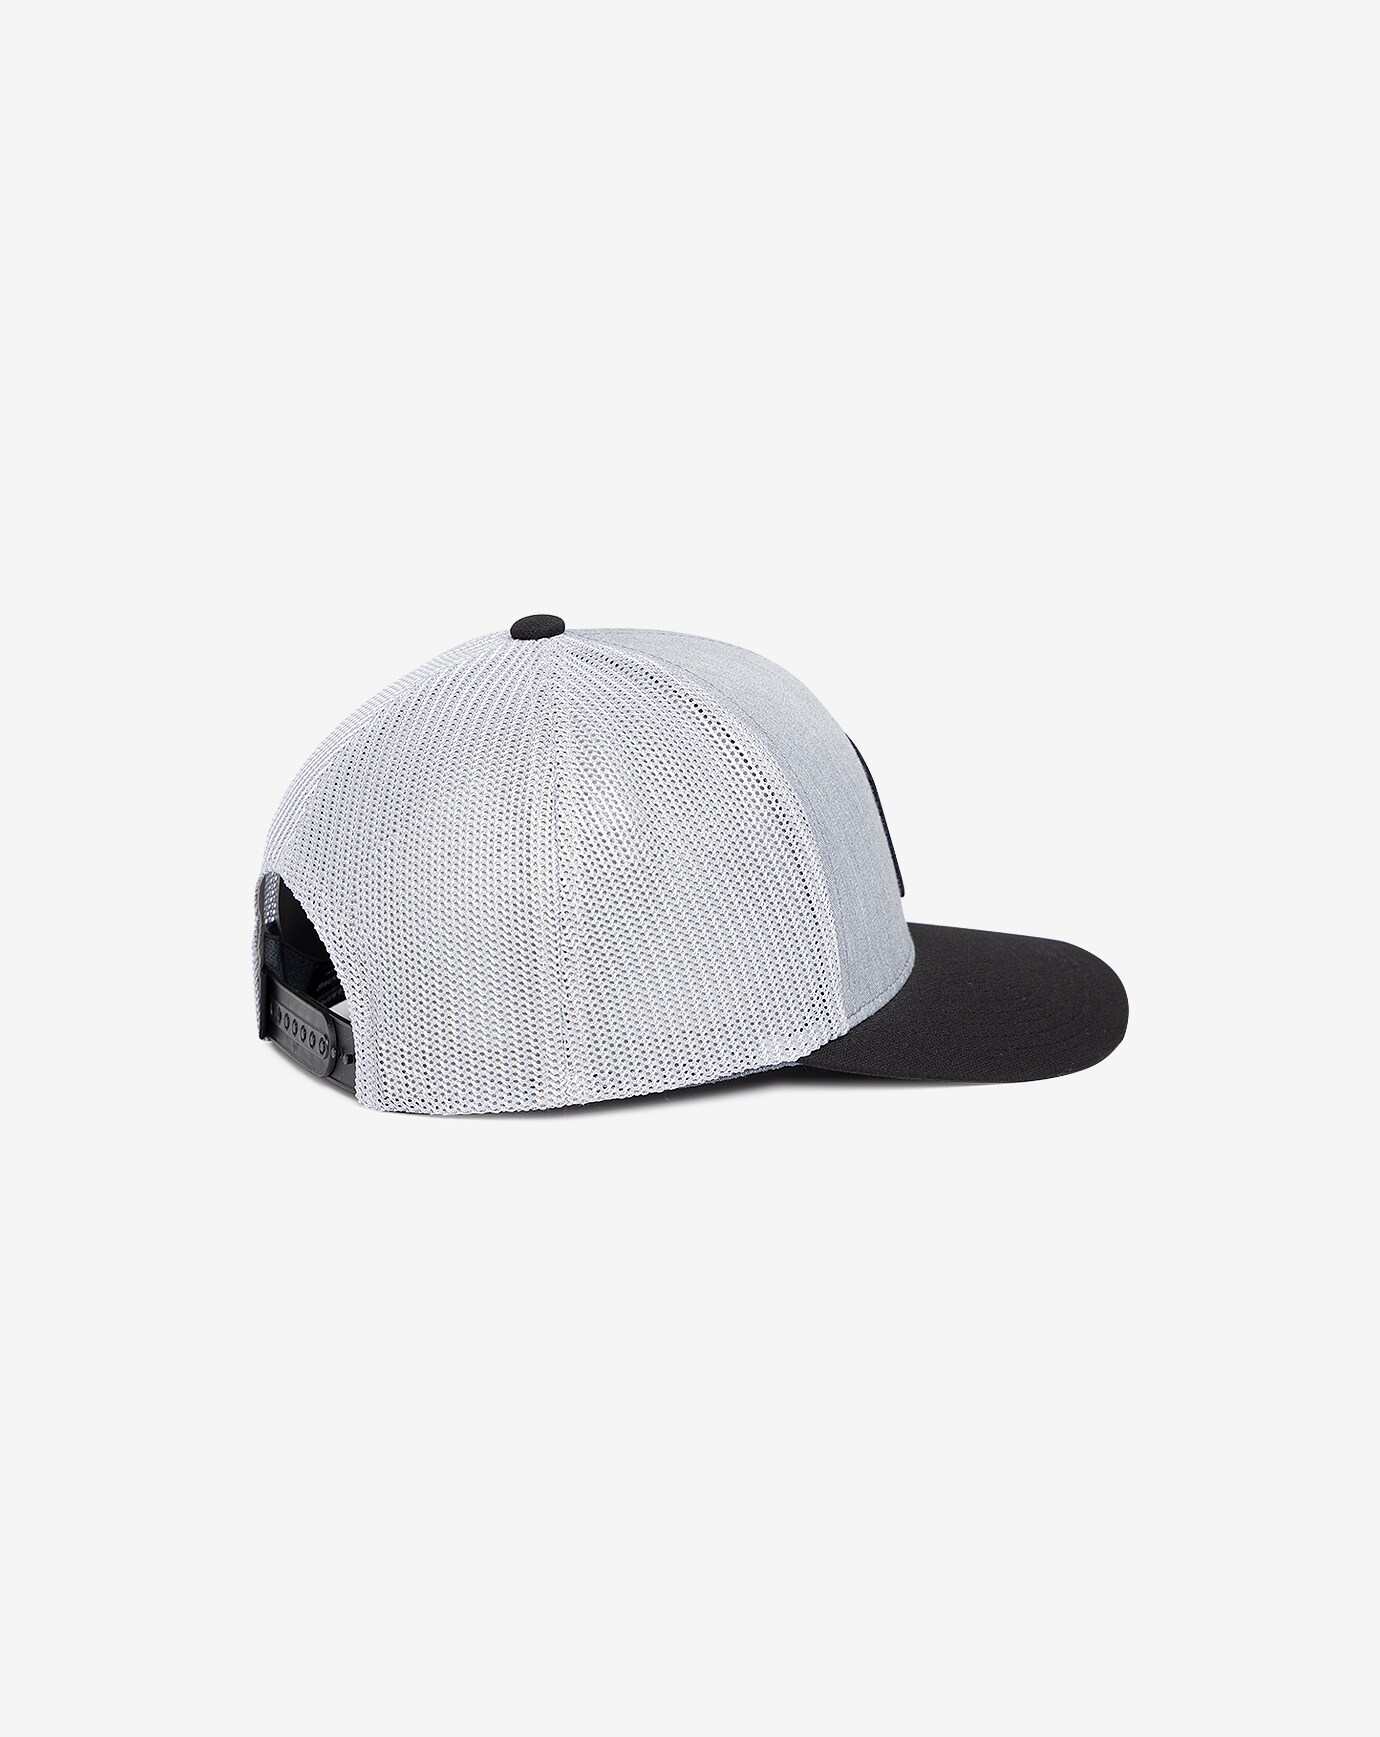 EXPENSE REPORT SNAPBACK HAT Image 3